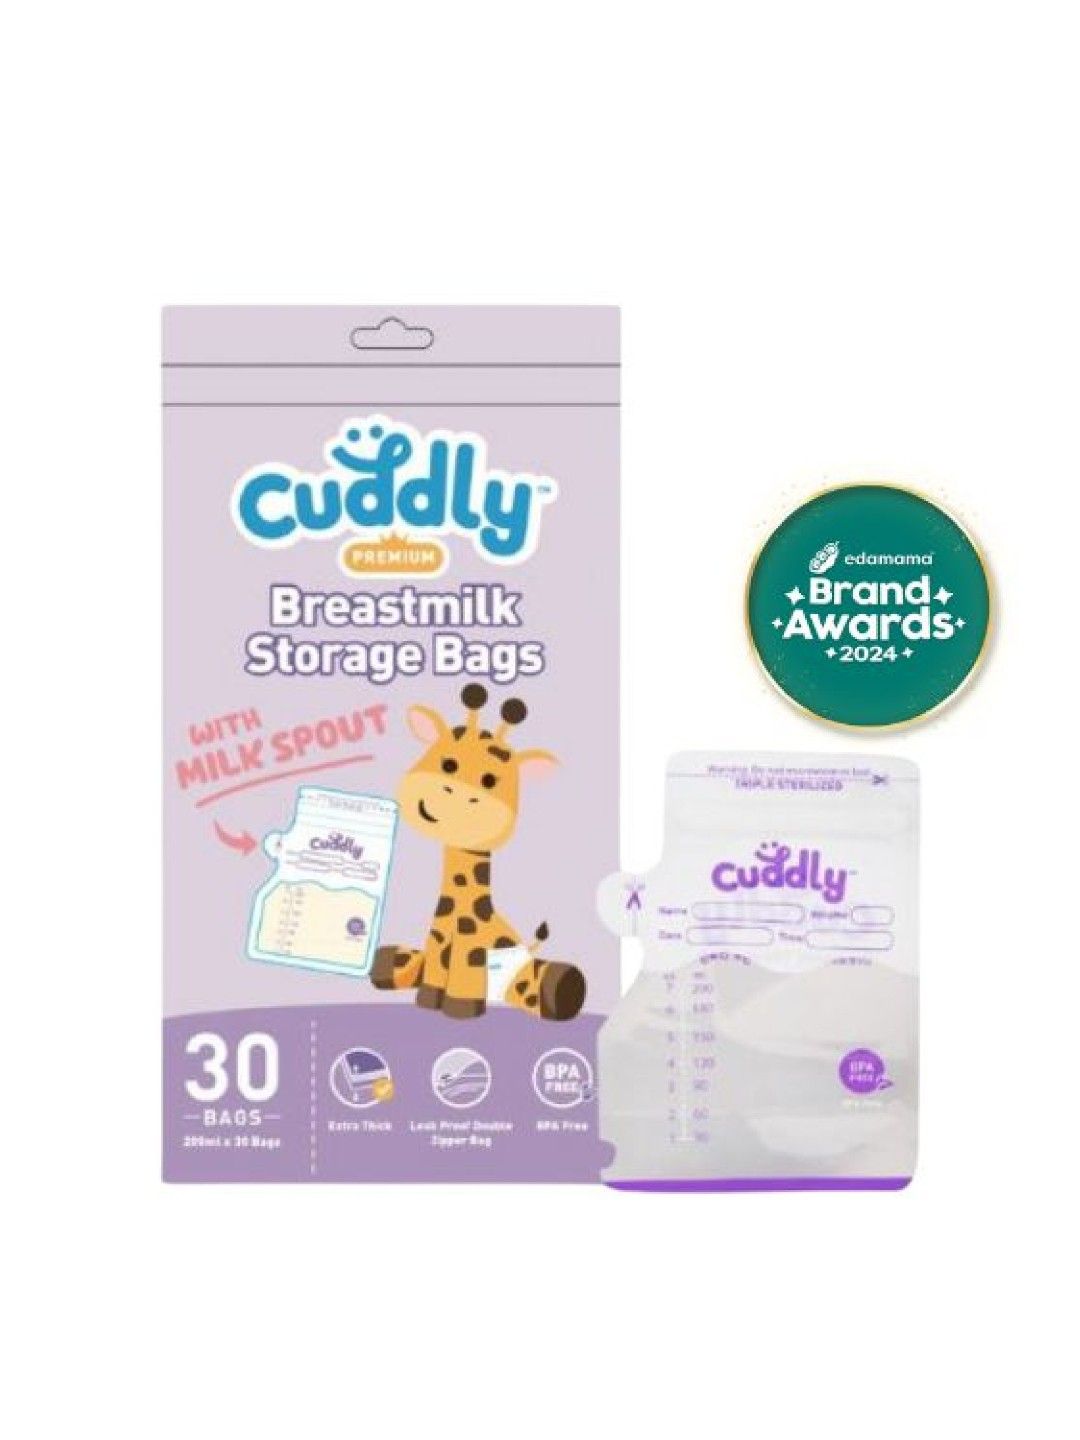 Cuddly Premium Extra-Thick Breastmilk Storage Bag with Spout 200ml (30 Bags)